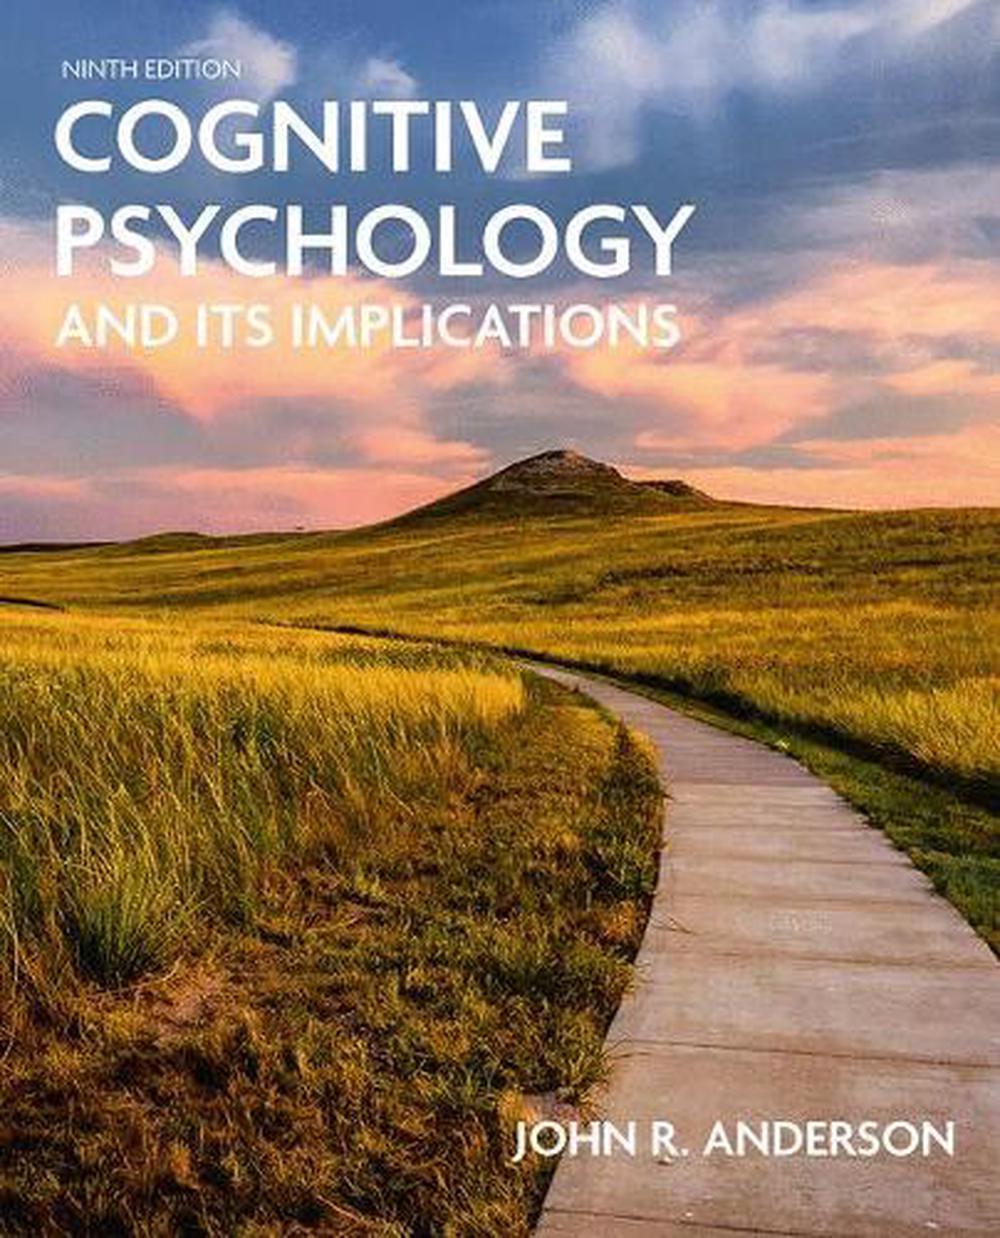 Cognitive Psychology and Its Implications 9th Edition by John R